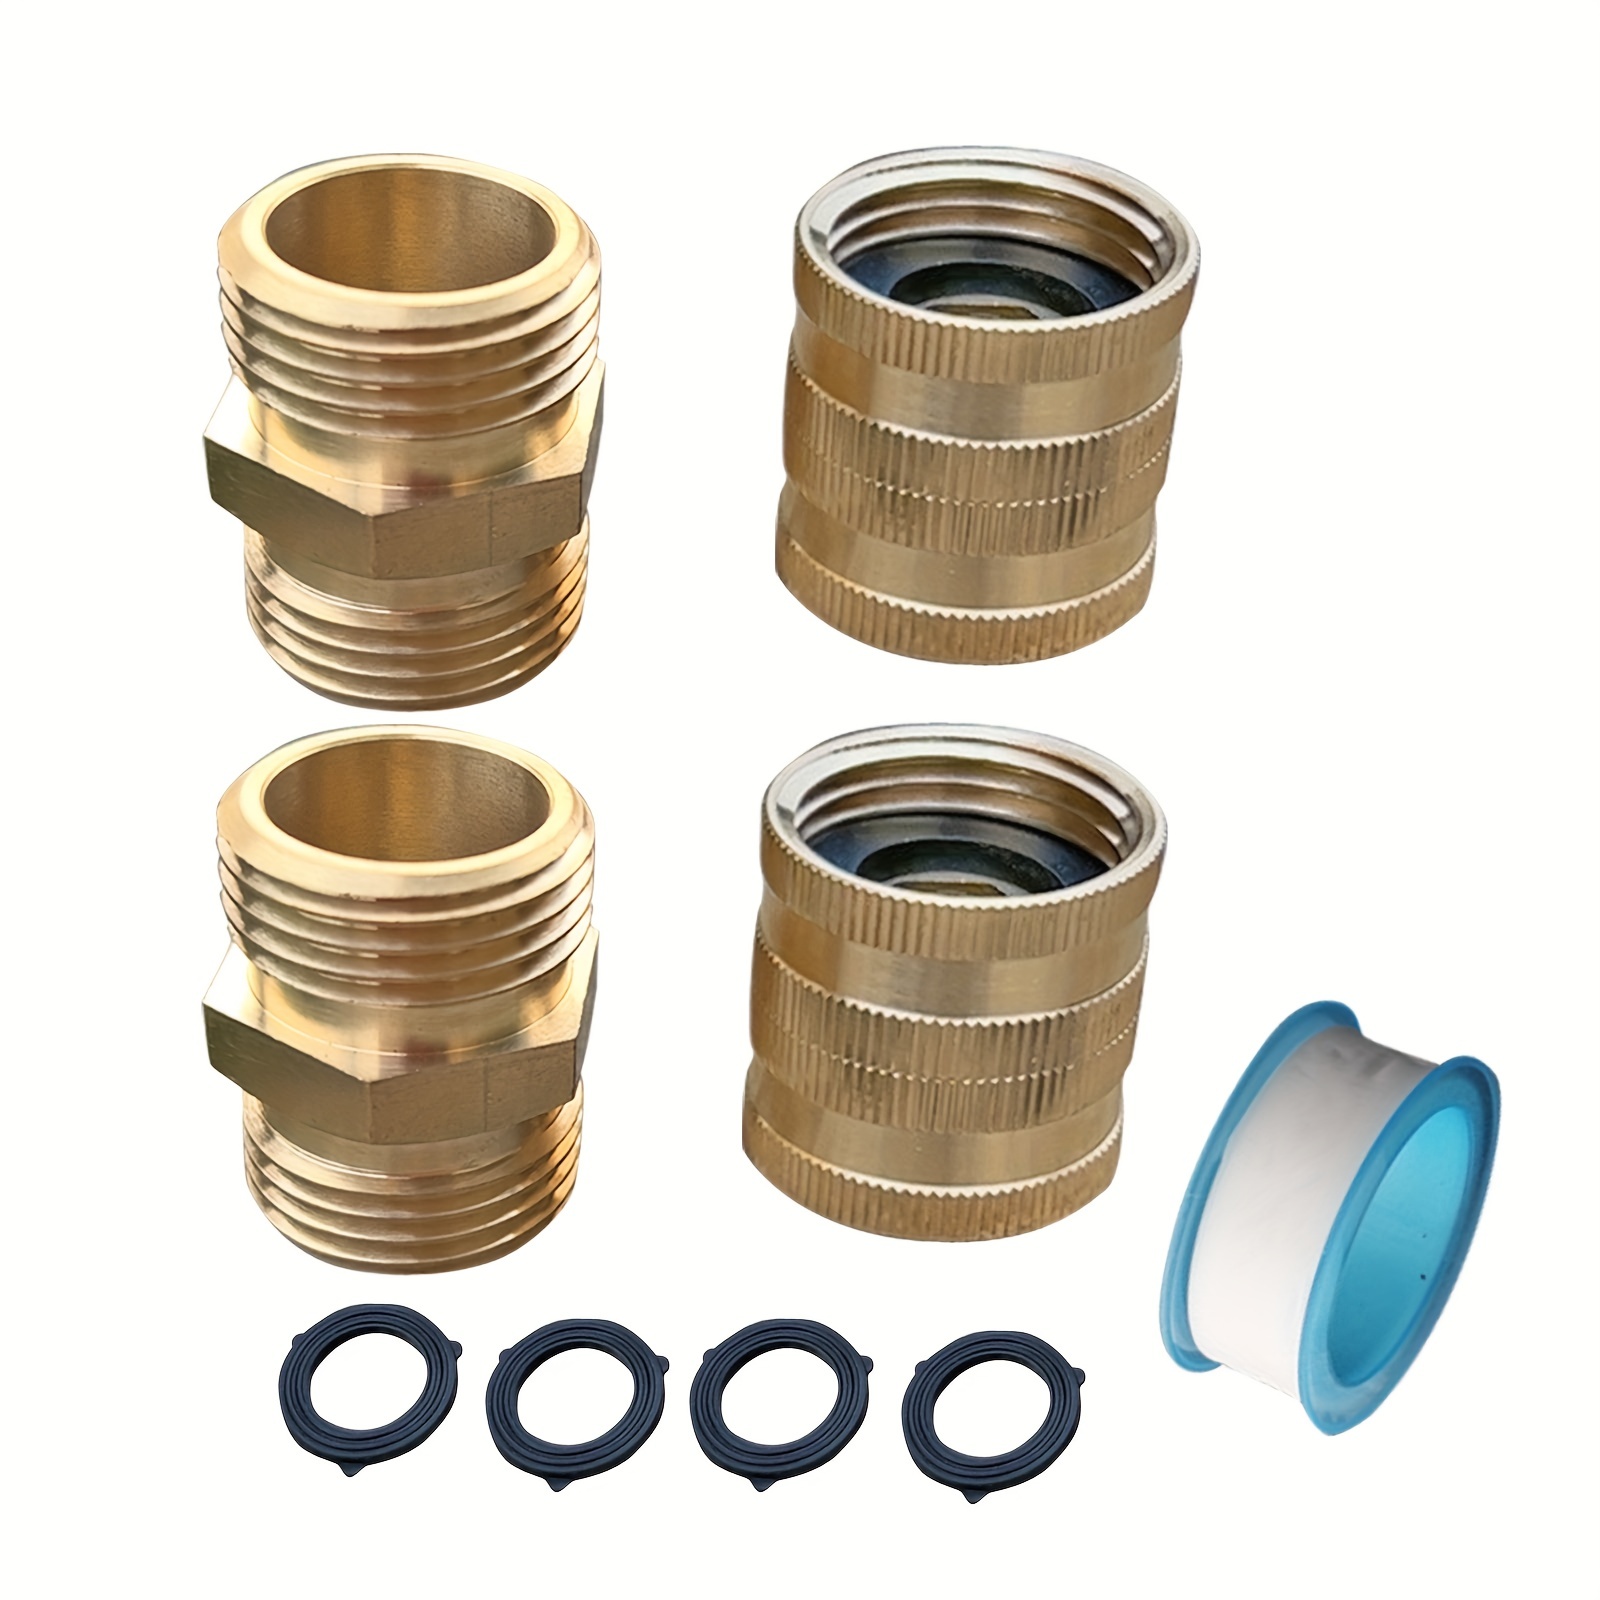 3/4GHT Two Way Inner Tooth Brass Rotary Flexible Garden Hose Adapter With  2 Female And 2 Male For Garden Hose/ Water Pipe Garden Hose Fittings Faucet